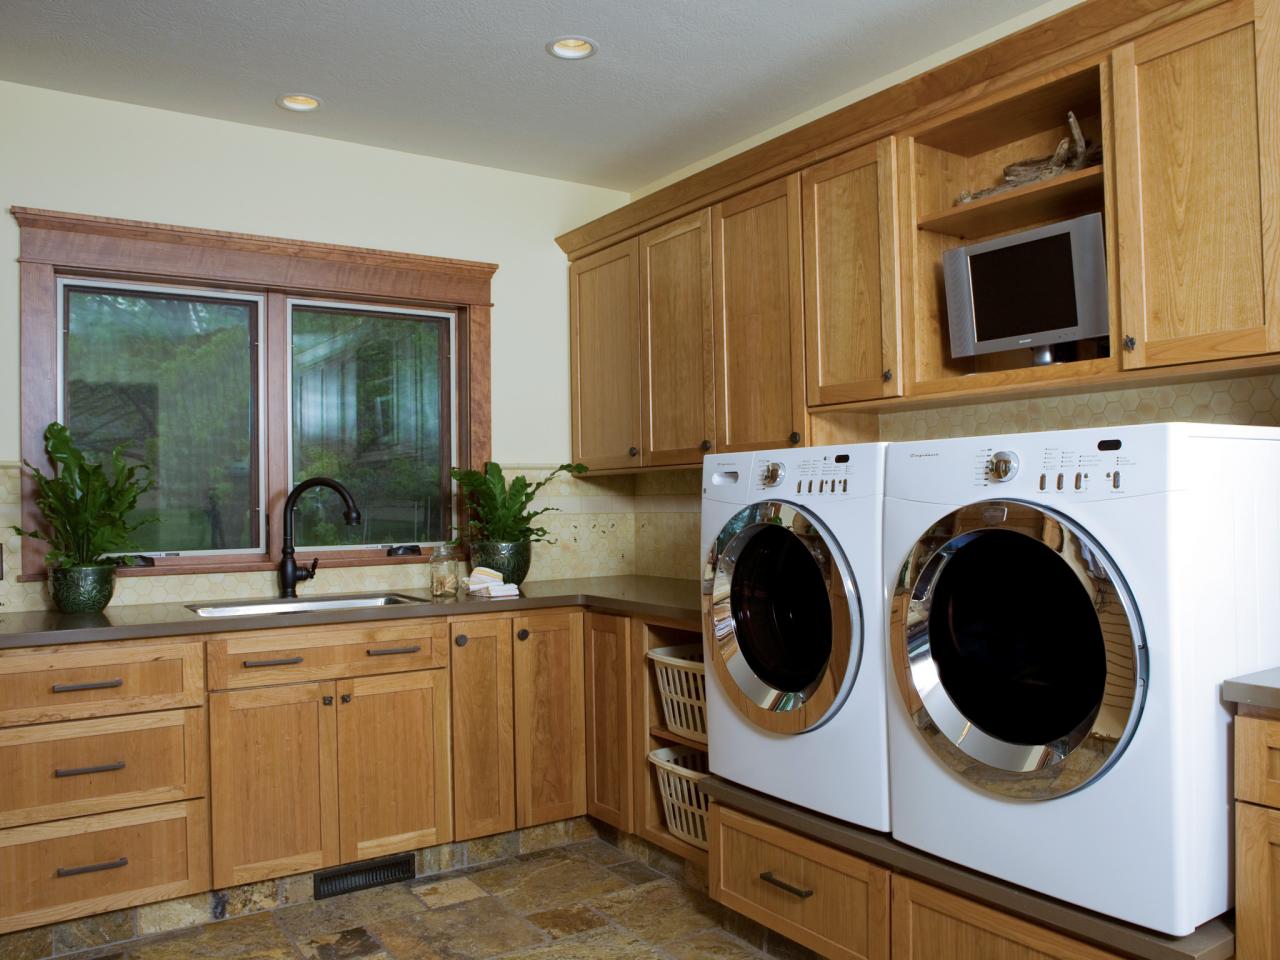 Laundry Room Organization And Storage Ideas Pictures Options